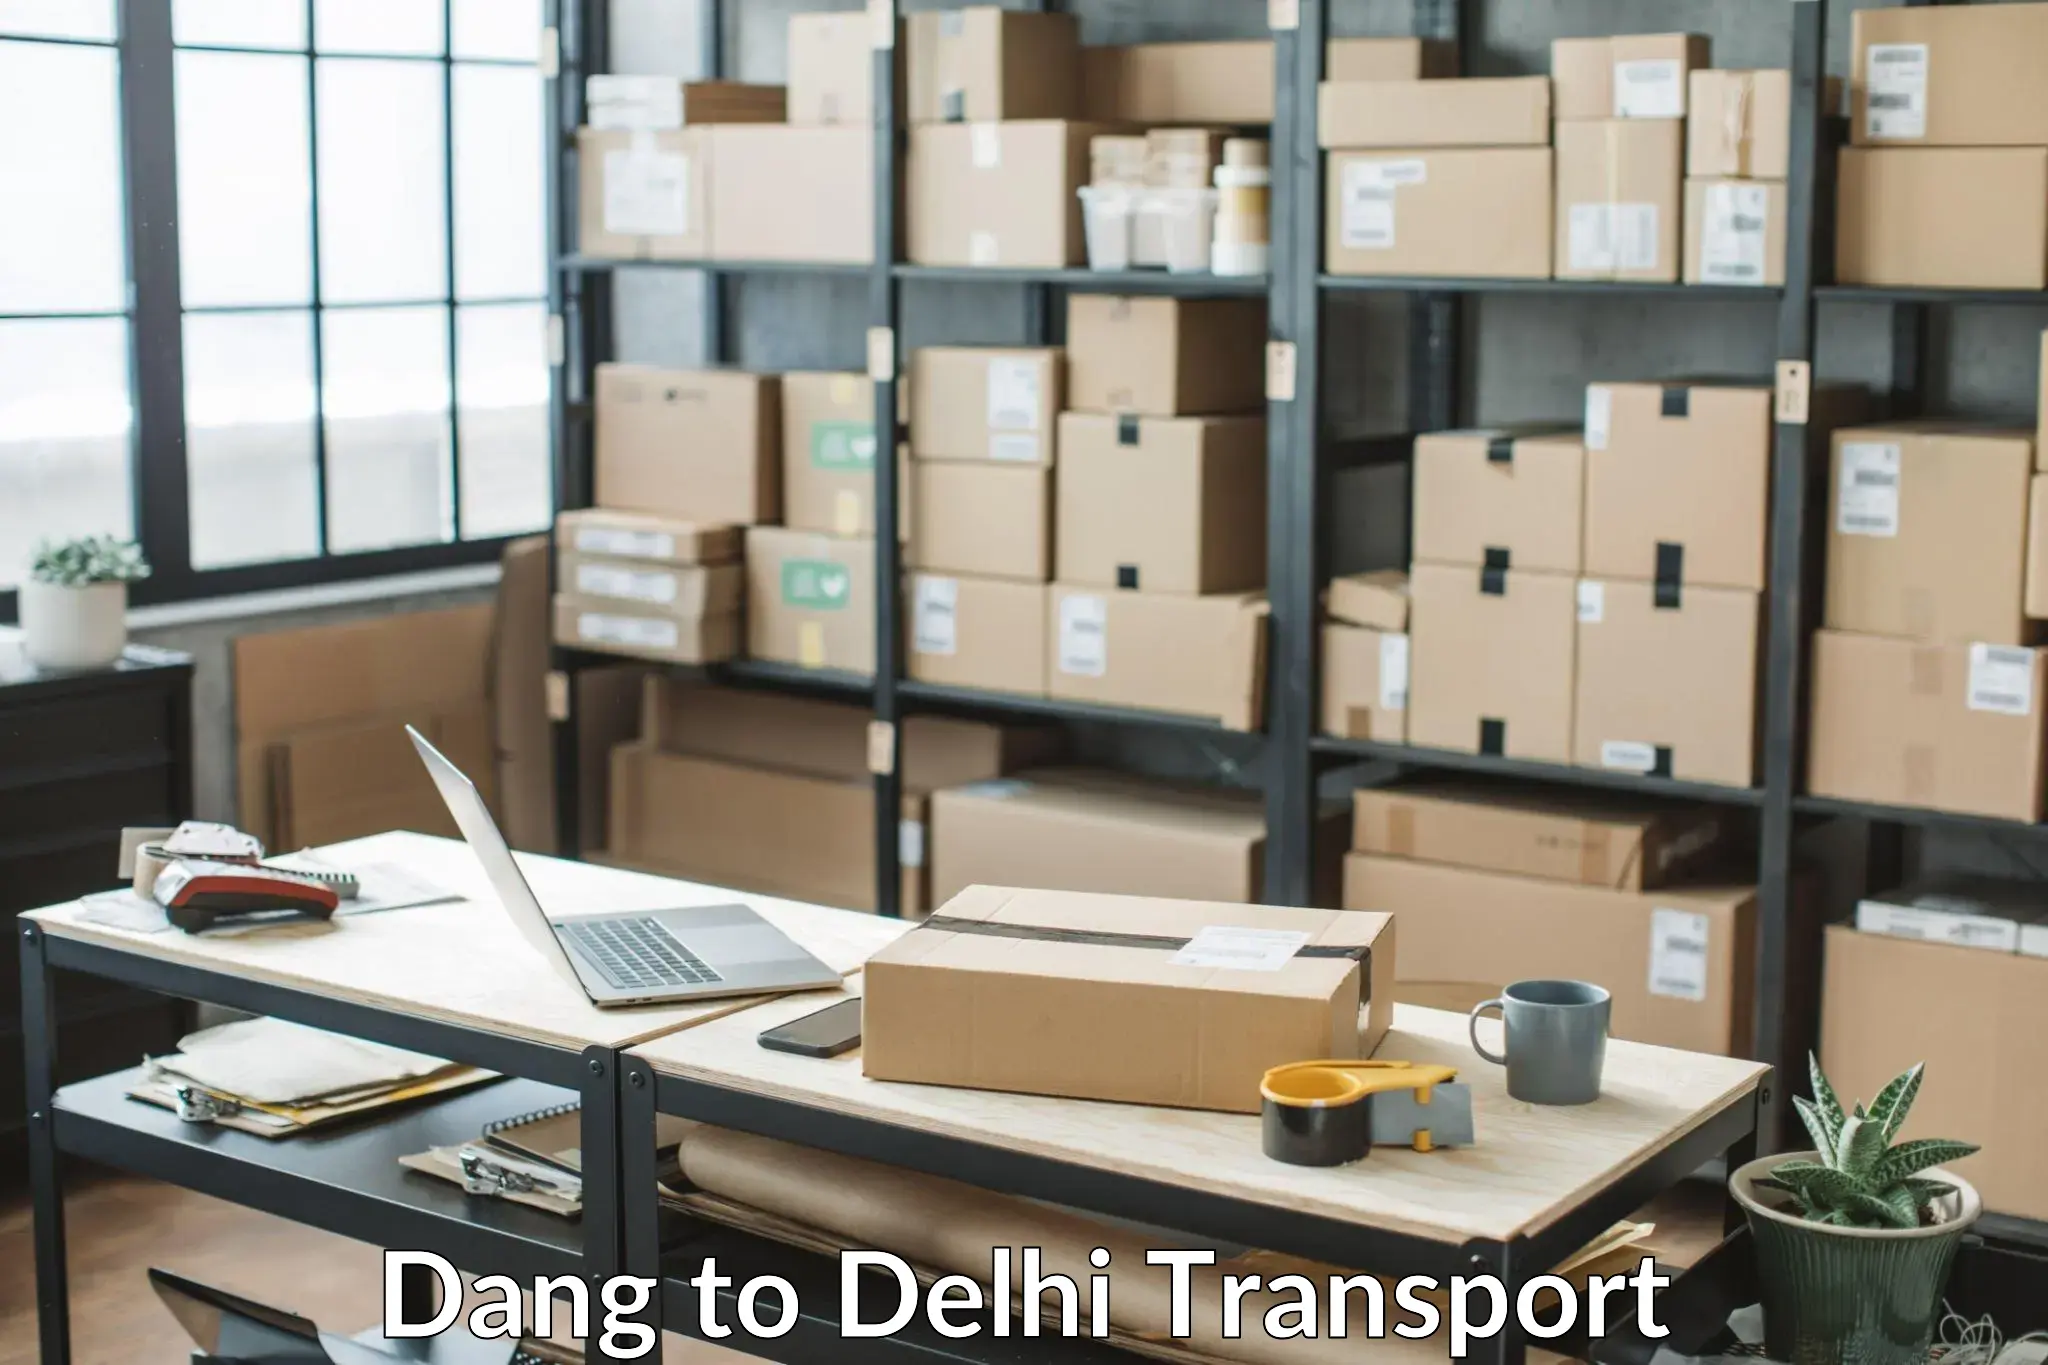 Container transport service Dang to Delhi